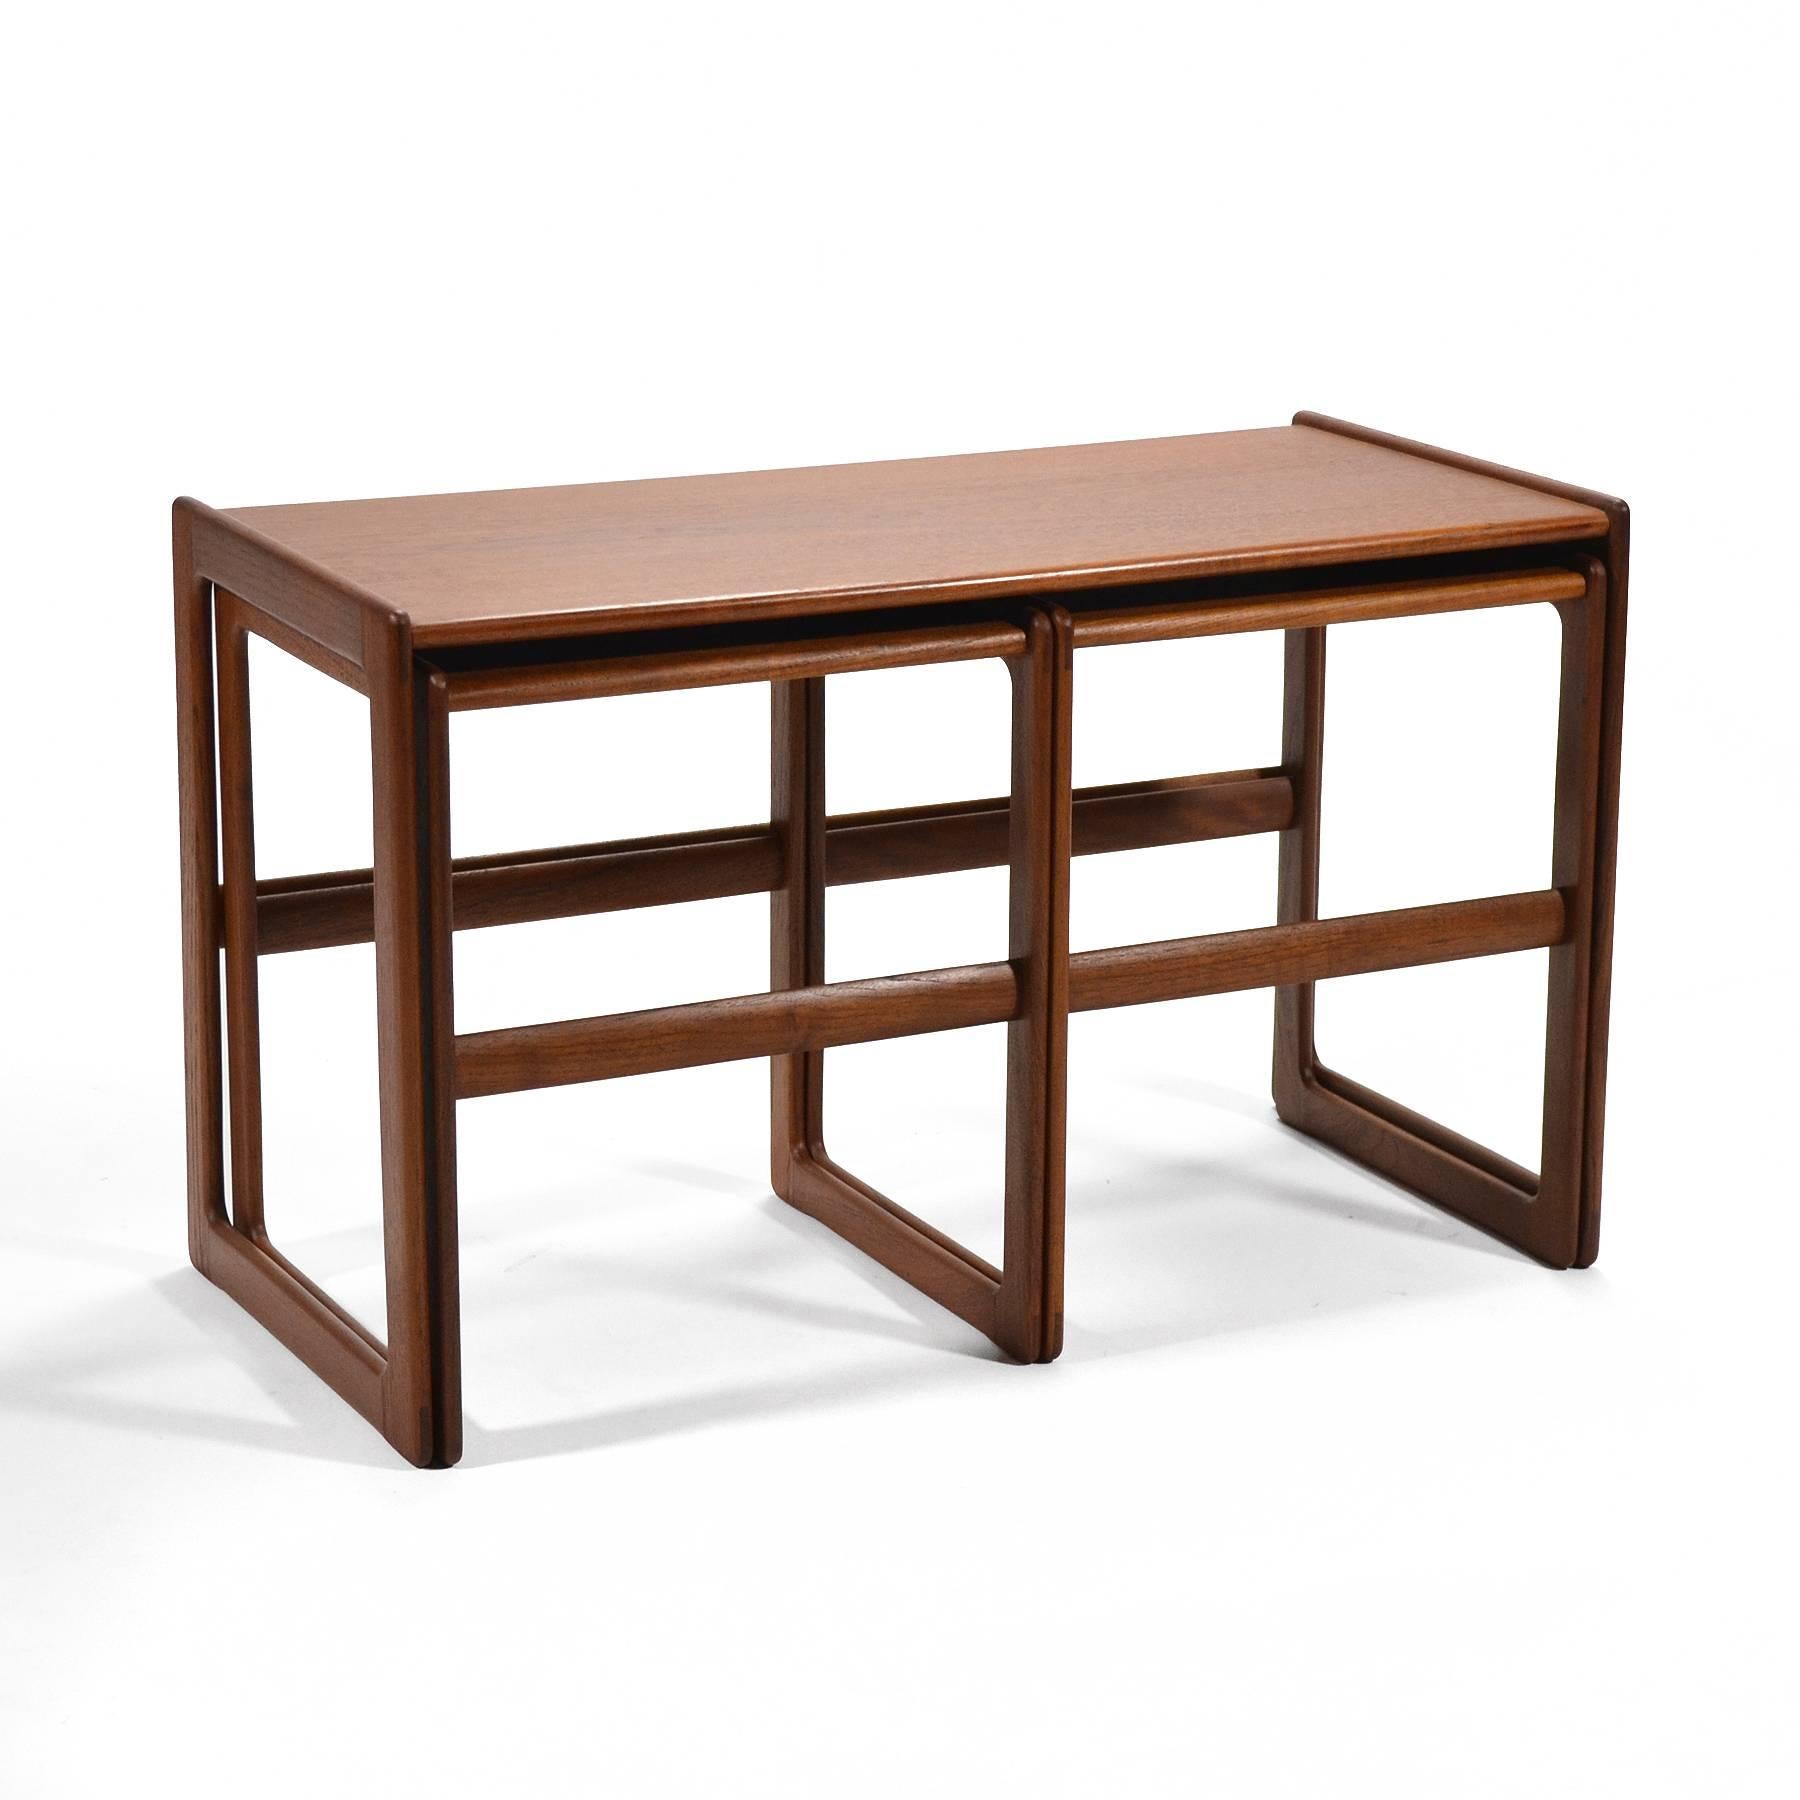 This lovely set of teak nesting tables in teak are not only handsome, they are incredibly versatile. The two smaller tables nest side-by-side under the larger table. With curved corners, raised edges, and exquisite joinery, they offer several